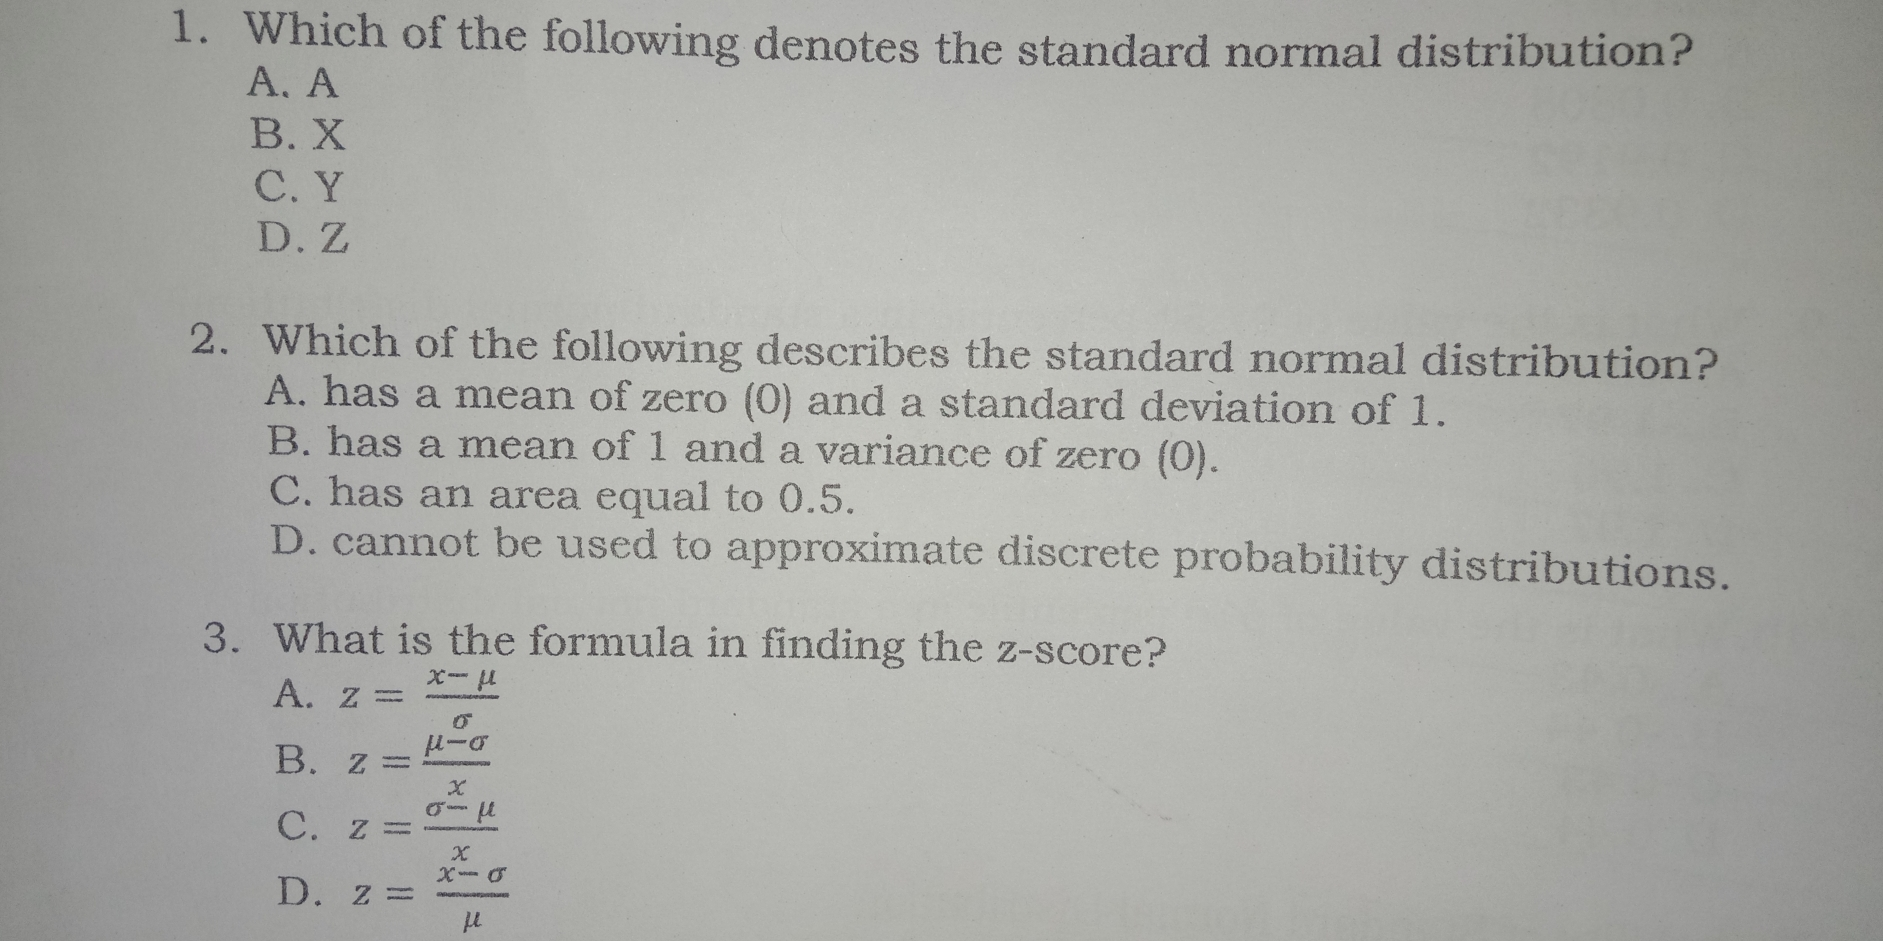 1. Which of the following denotes the standard normal distribution? A、A B. X C.Y D.Z 2. Which of the following describes the standard normal distribution? A. has a mean of zero 0 and a standard deviation of 1. B. has a mean of 1 and a variance of zero 0. C. has an area equal to .5. D. cannot be used to approximate discrete probability distributions. 3. What is the formula in finding the Z-SCOre A. z=frac x-mu B. z=frac mu -sigma x C. z=frac sigma -mu r D. z=frac hat x-sigma mu